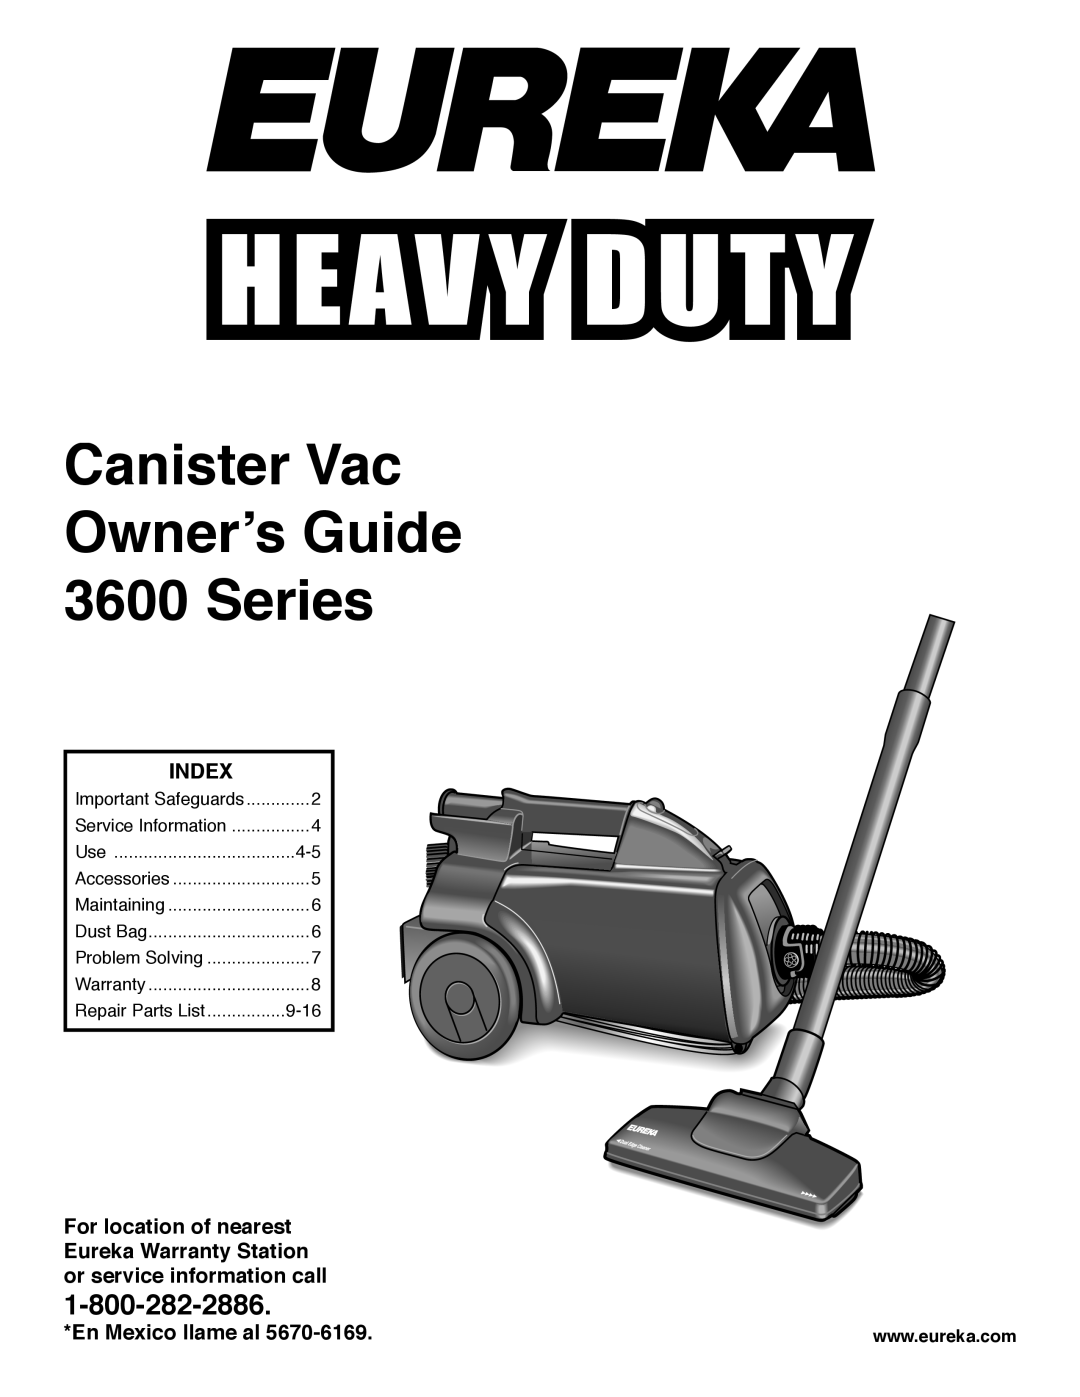 Eureka HD3684A warranty Index, En Mexico llame al, Canister Vac Ownerʼs Guide 3600 Series 